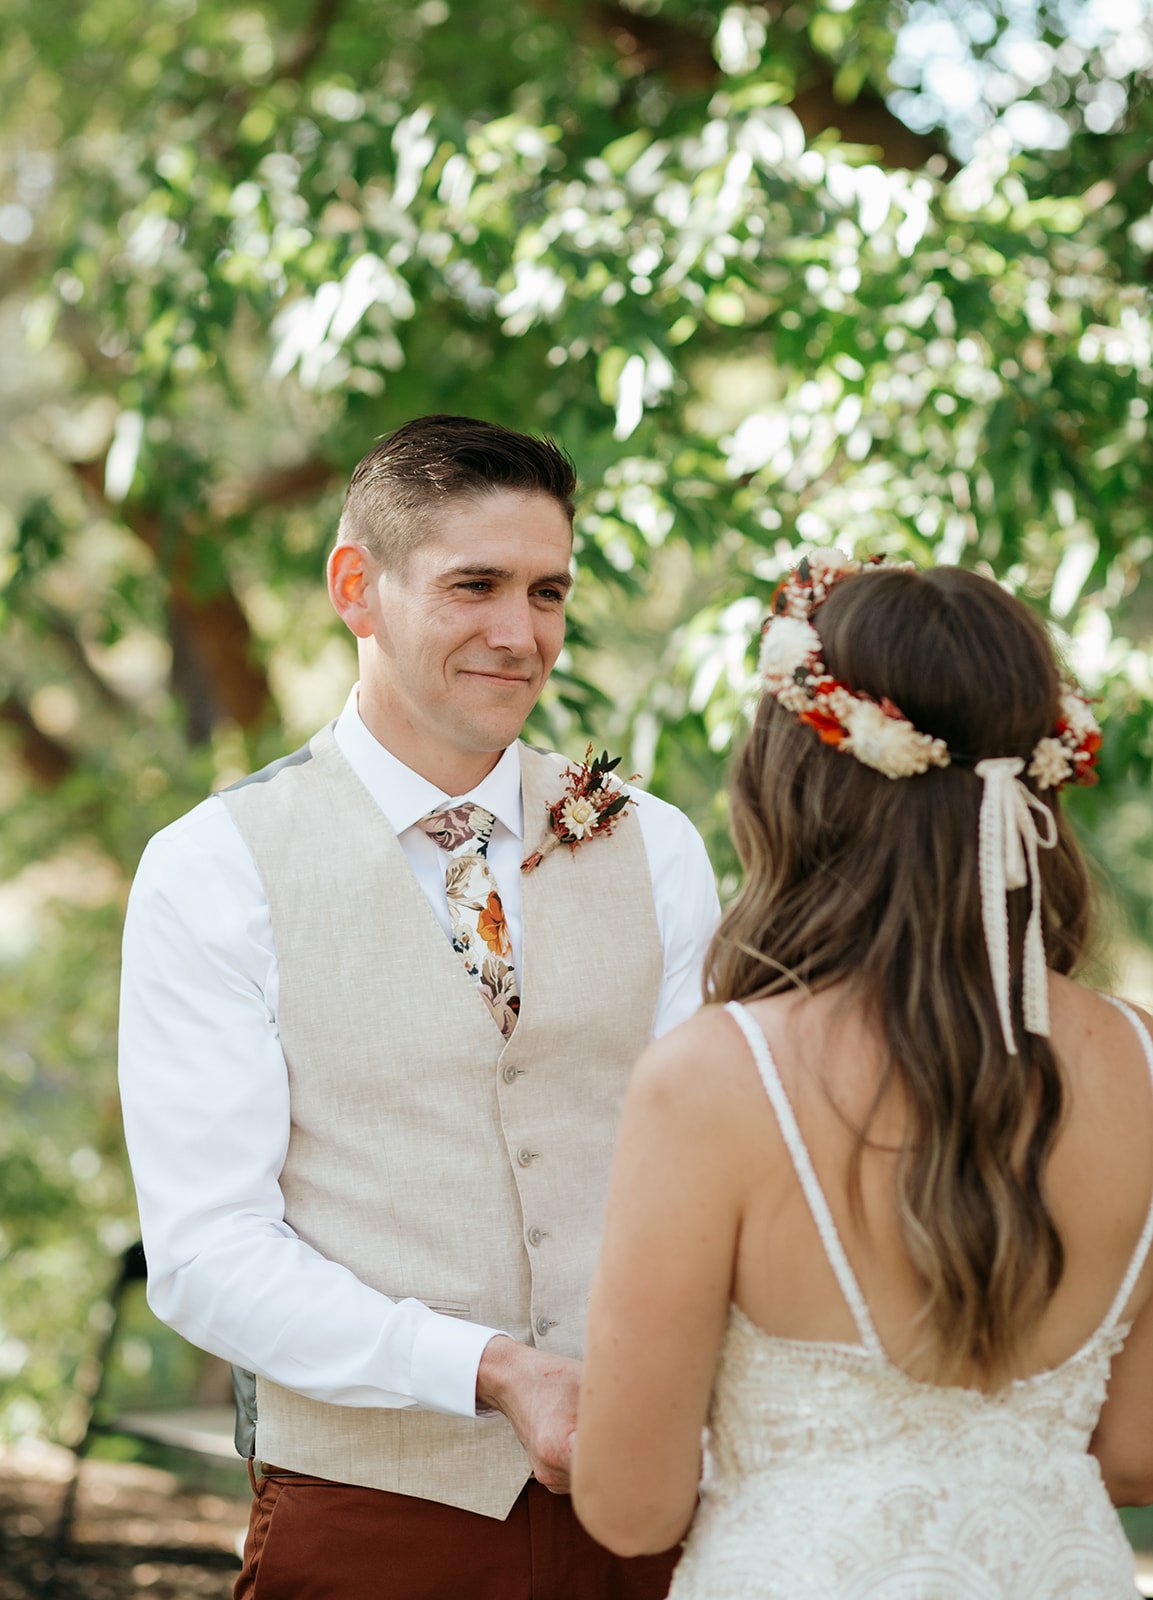 James had the sweetest expressions during their intimate ceremony